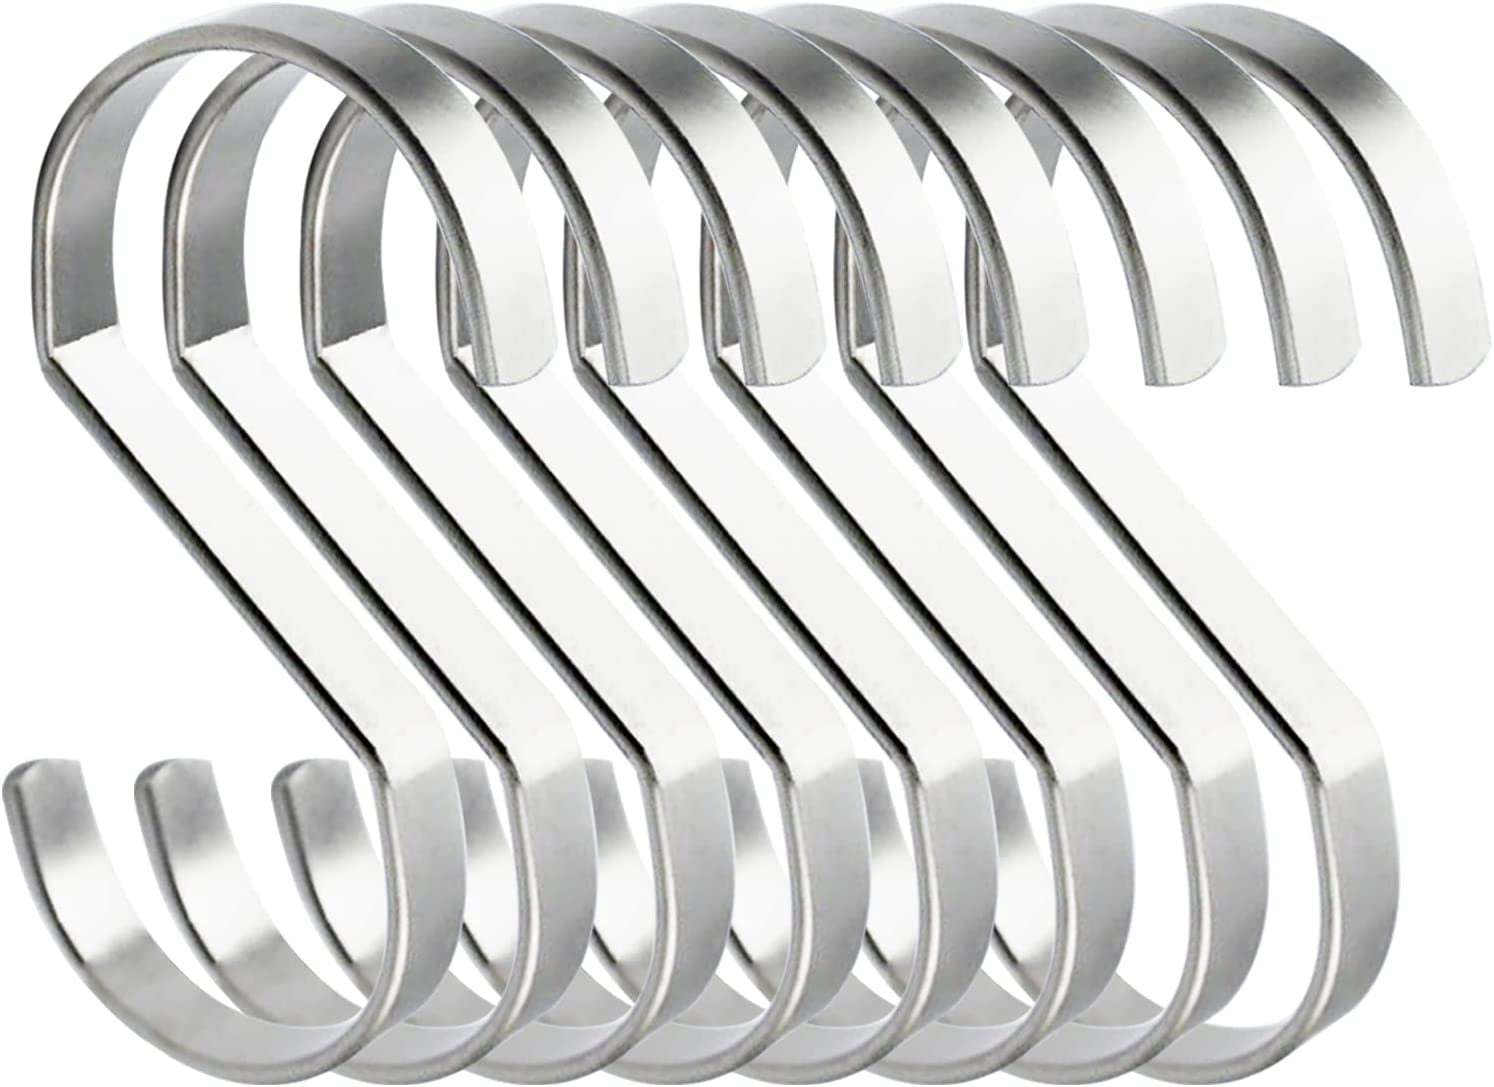 Libertyware MH166 Stainless Steel Meat Hook, 6 x 1/4